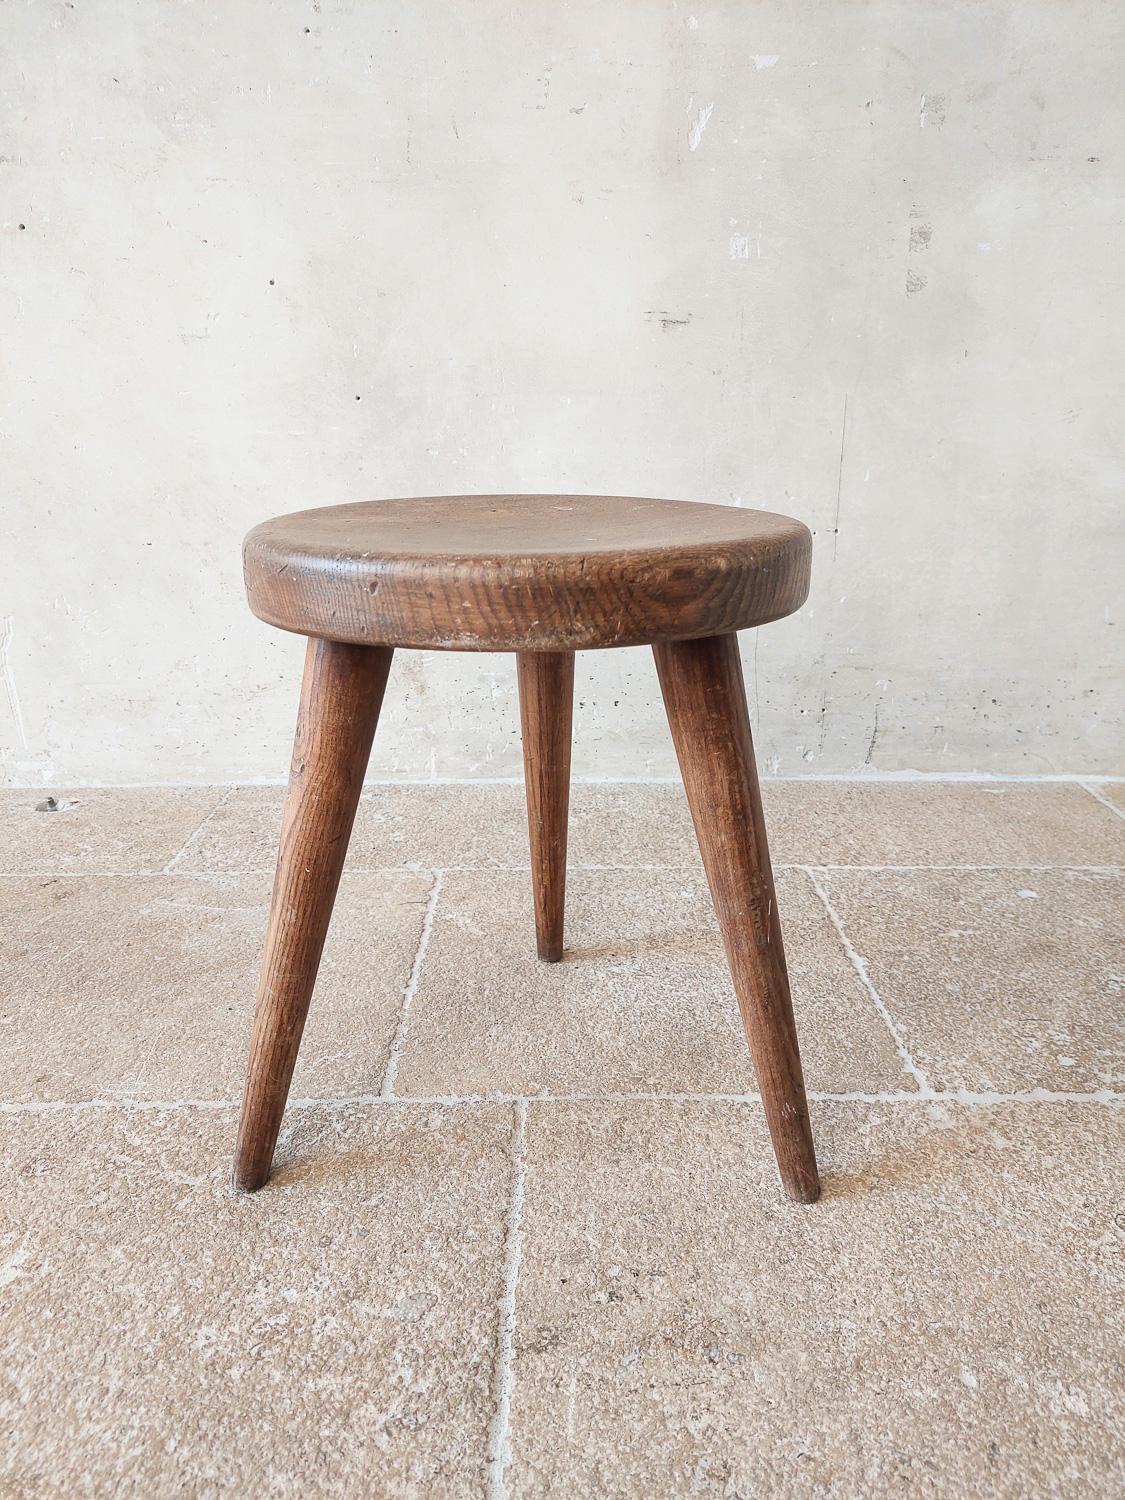 Mid-20th Century Charlotte Perriand Wooden Berger Stool, circa 1950 For Sale